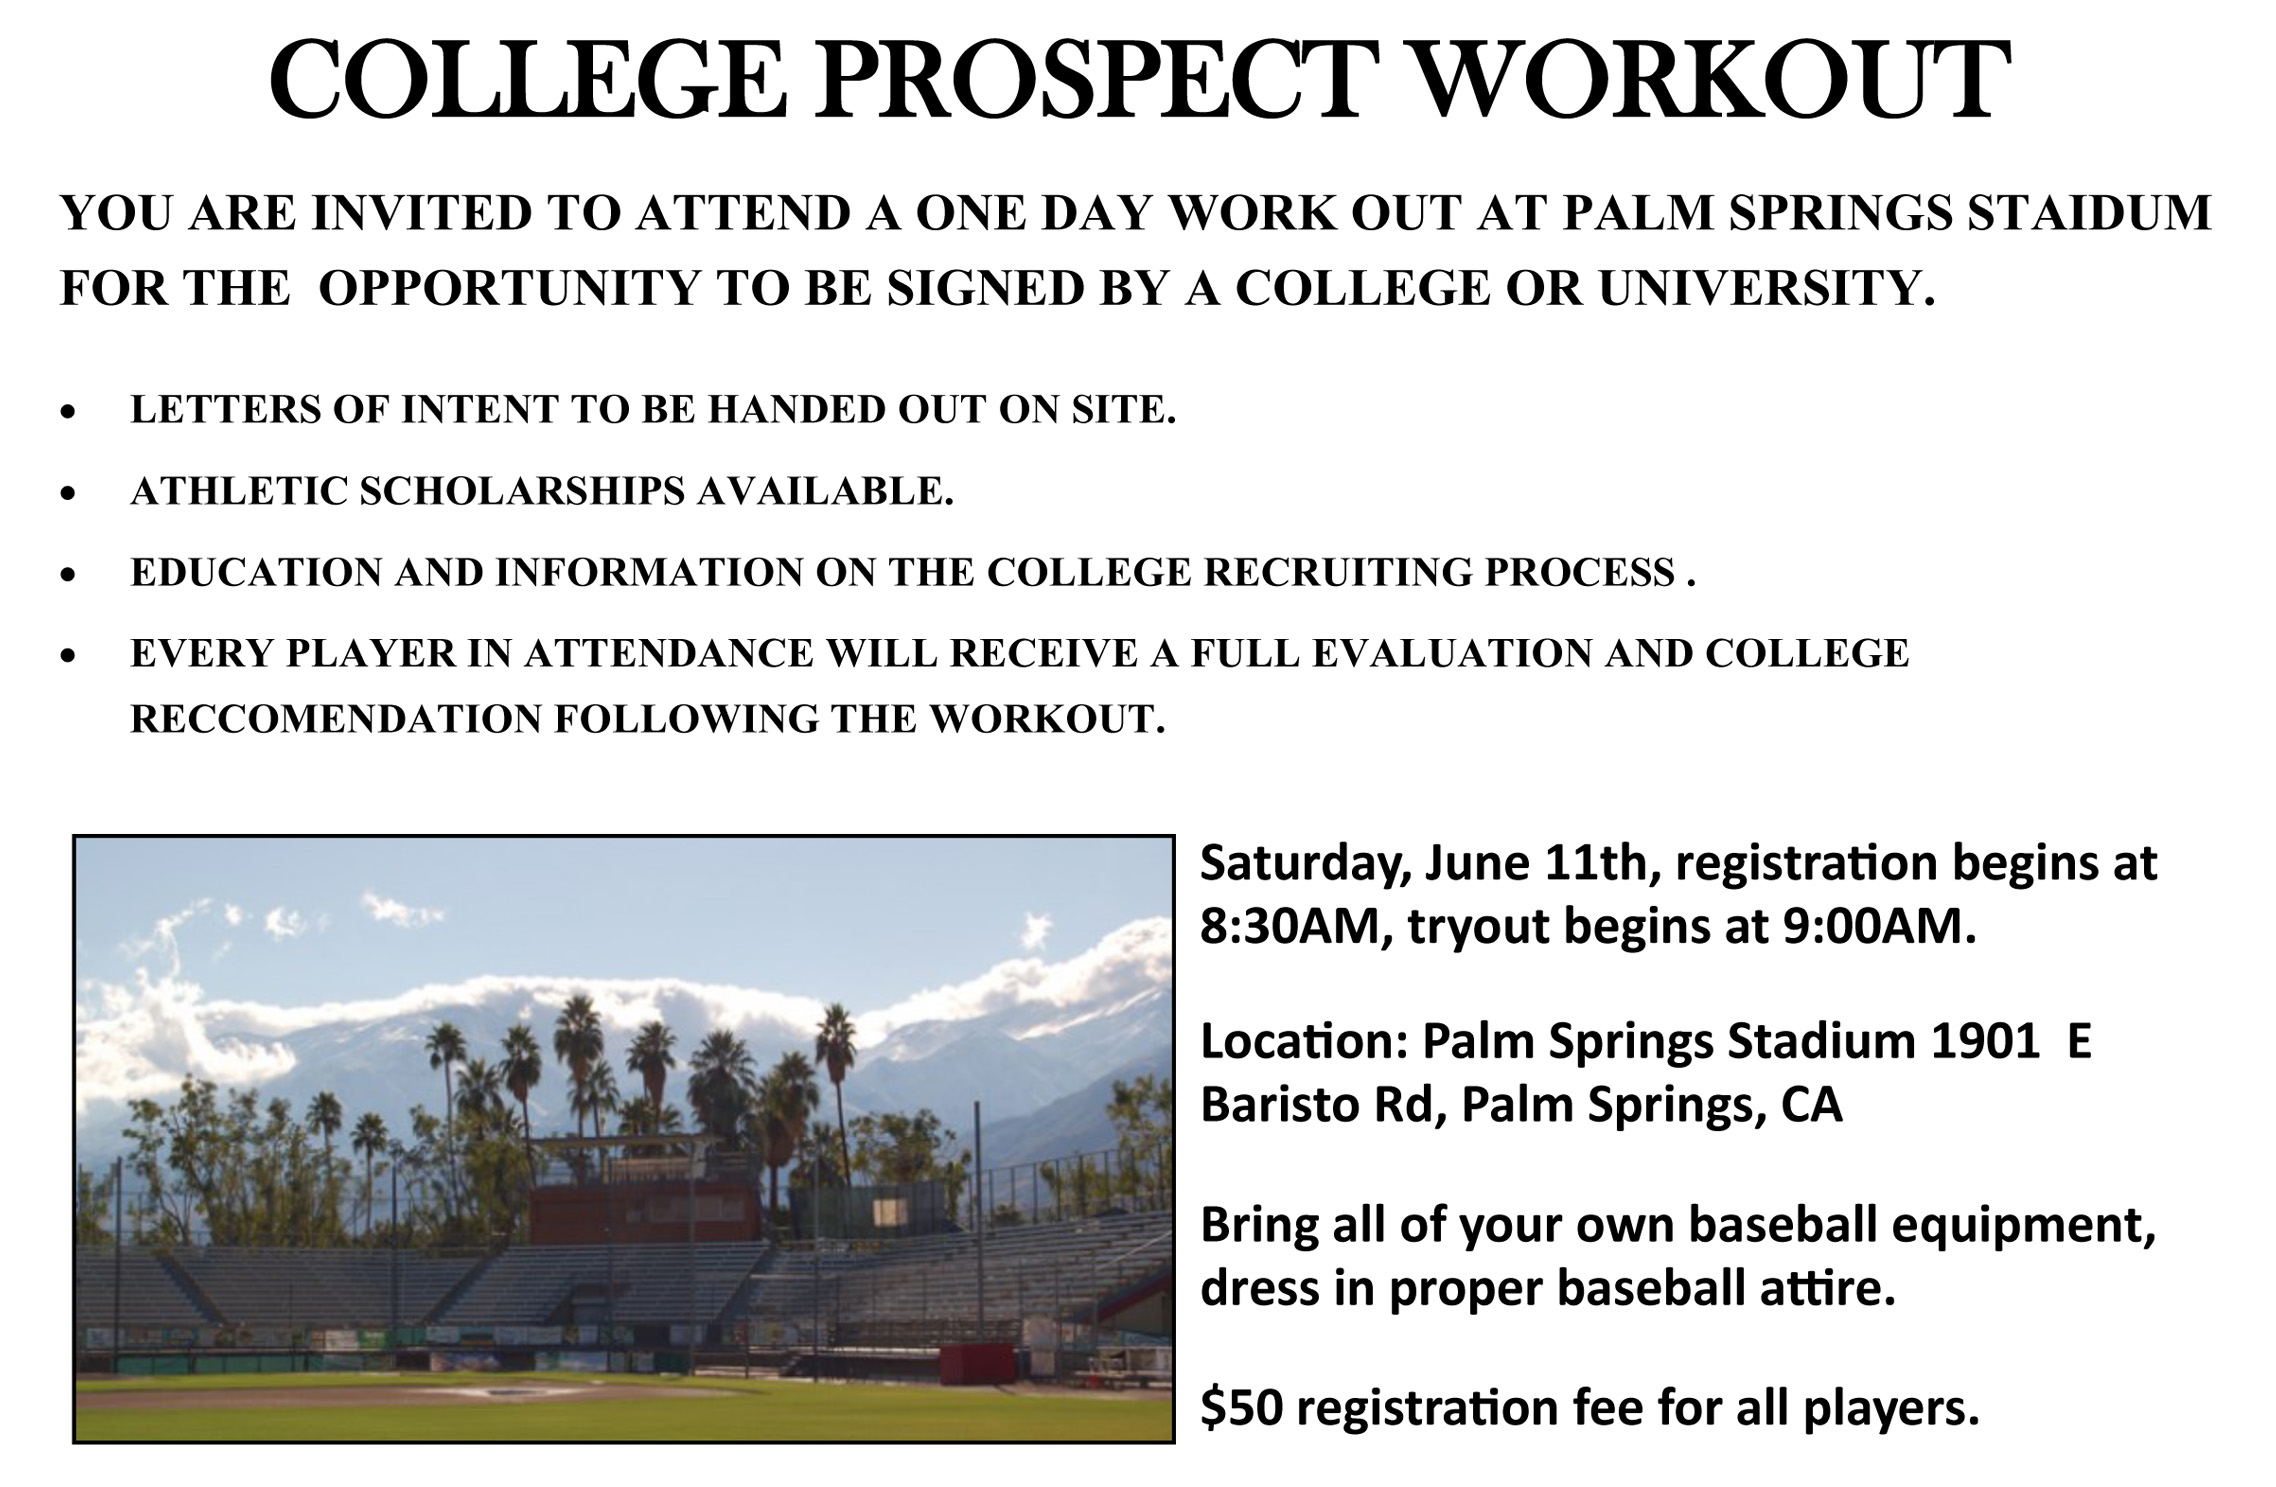 College Baseball Prospect Workout to be Held in Palm Springs